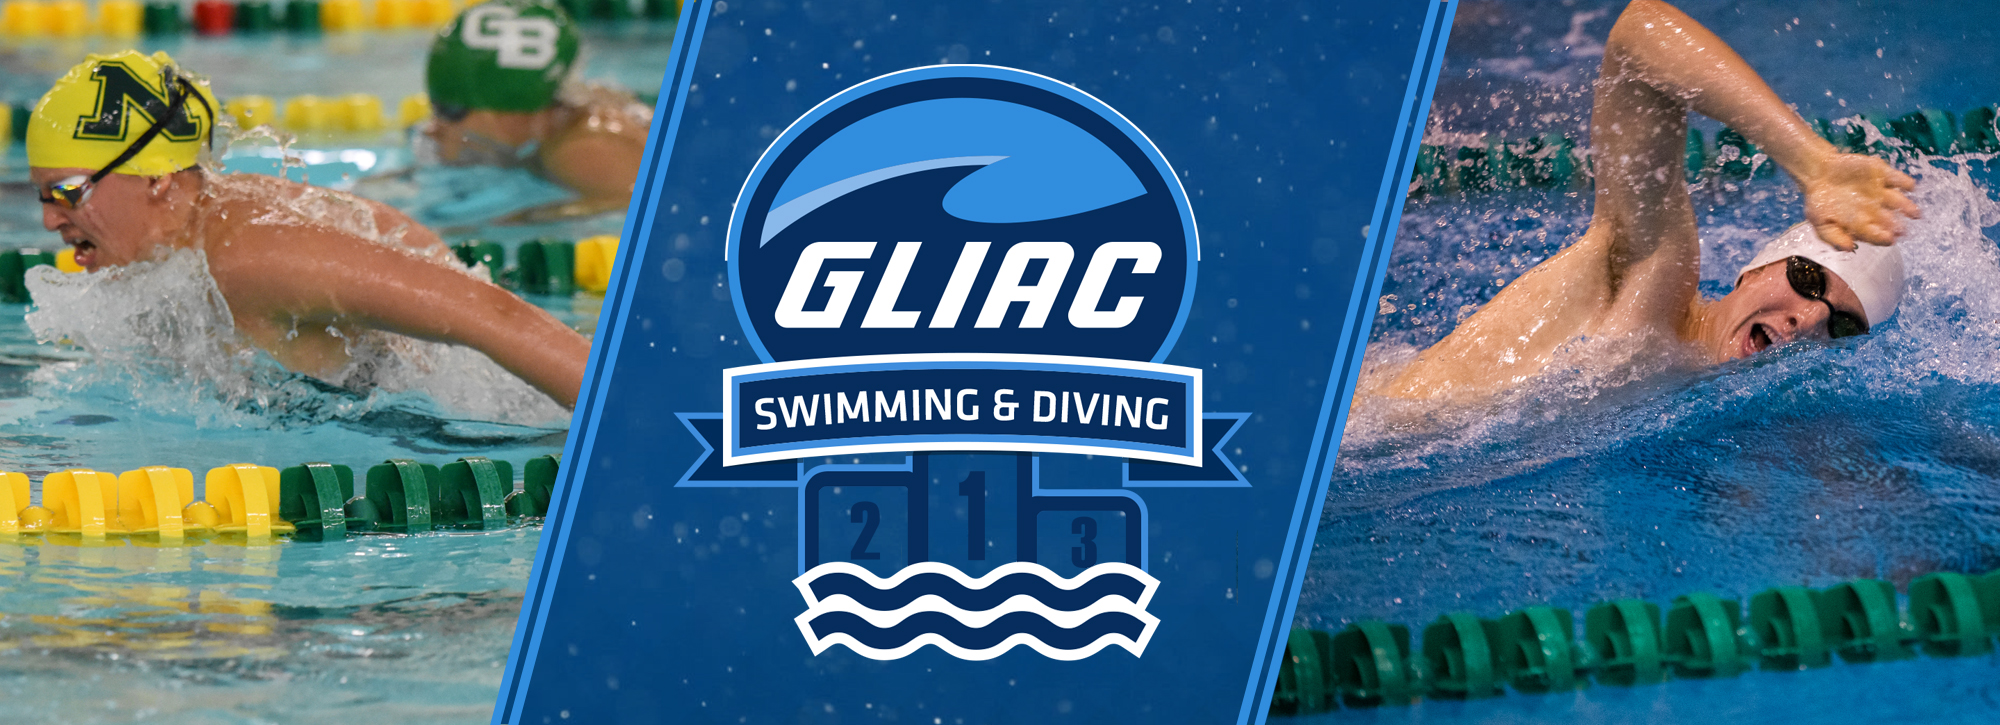 NMU's Helm and WSU's Katulski capture Week 10 swimming and diving honors